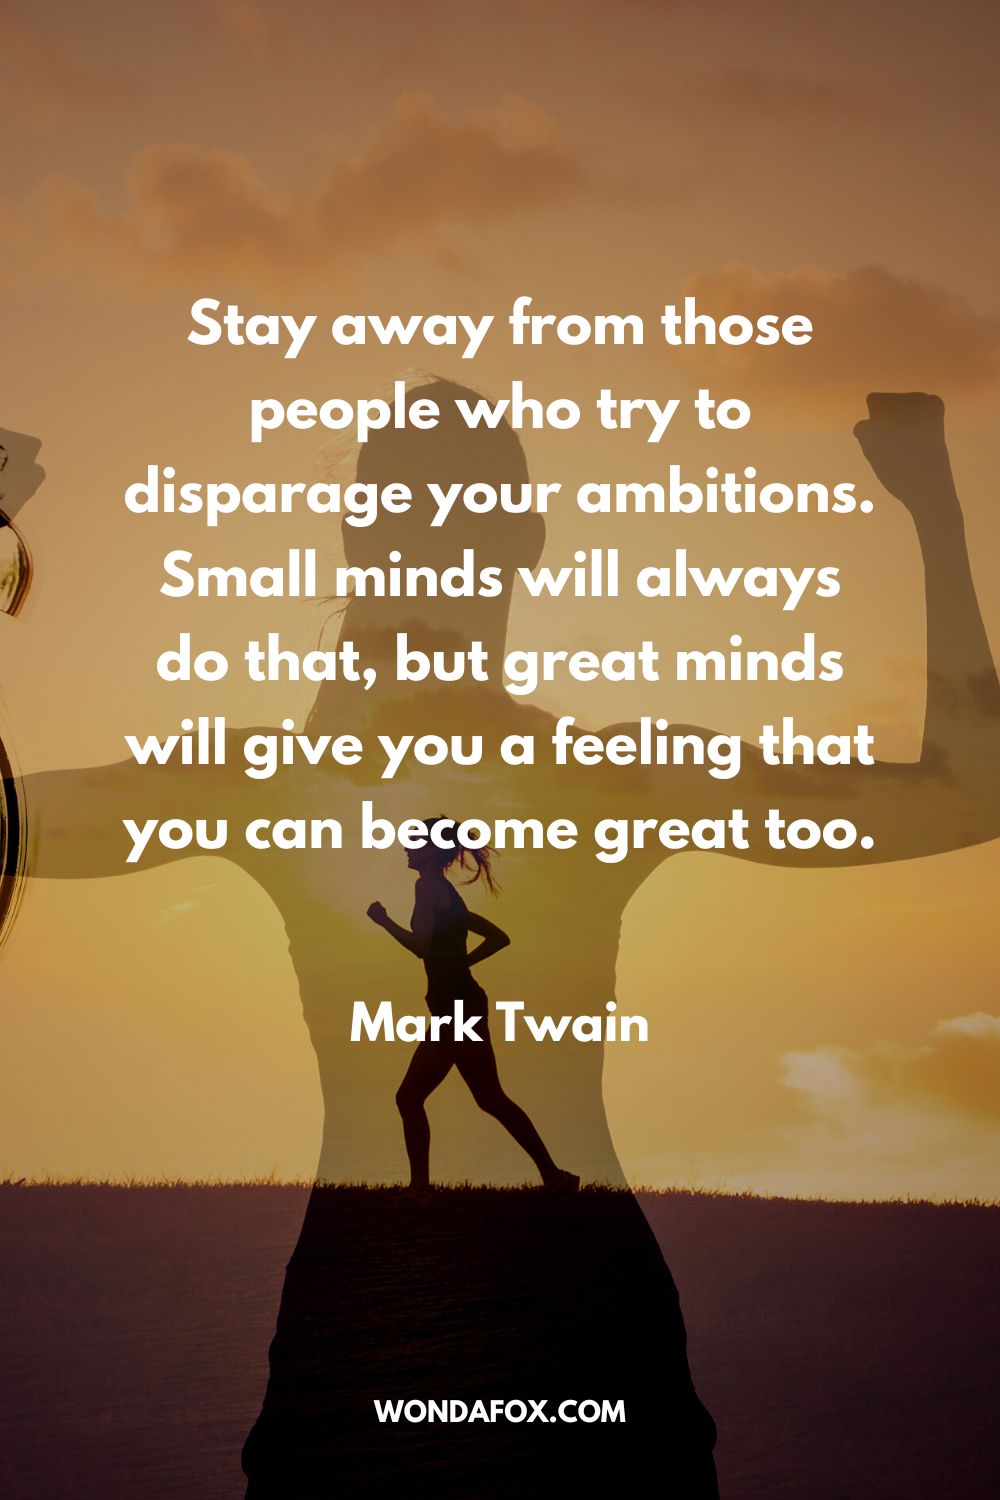 Stay away from those people who try to disparage your ambitions. Small minds will always do that, but great minds will give you a feeling that you can become great too. Mark Twain